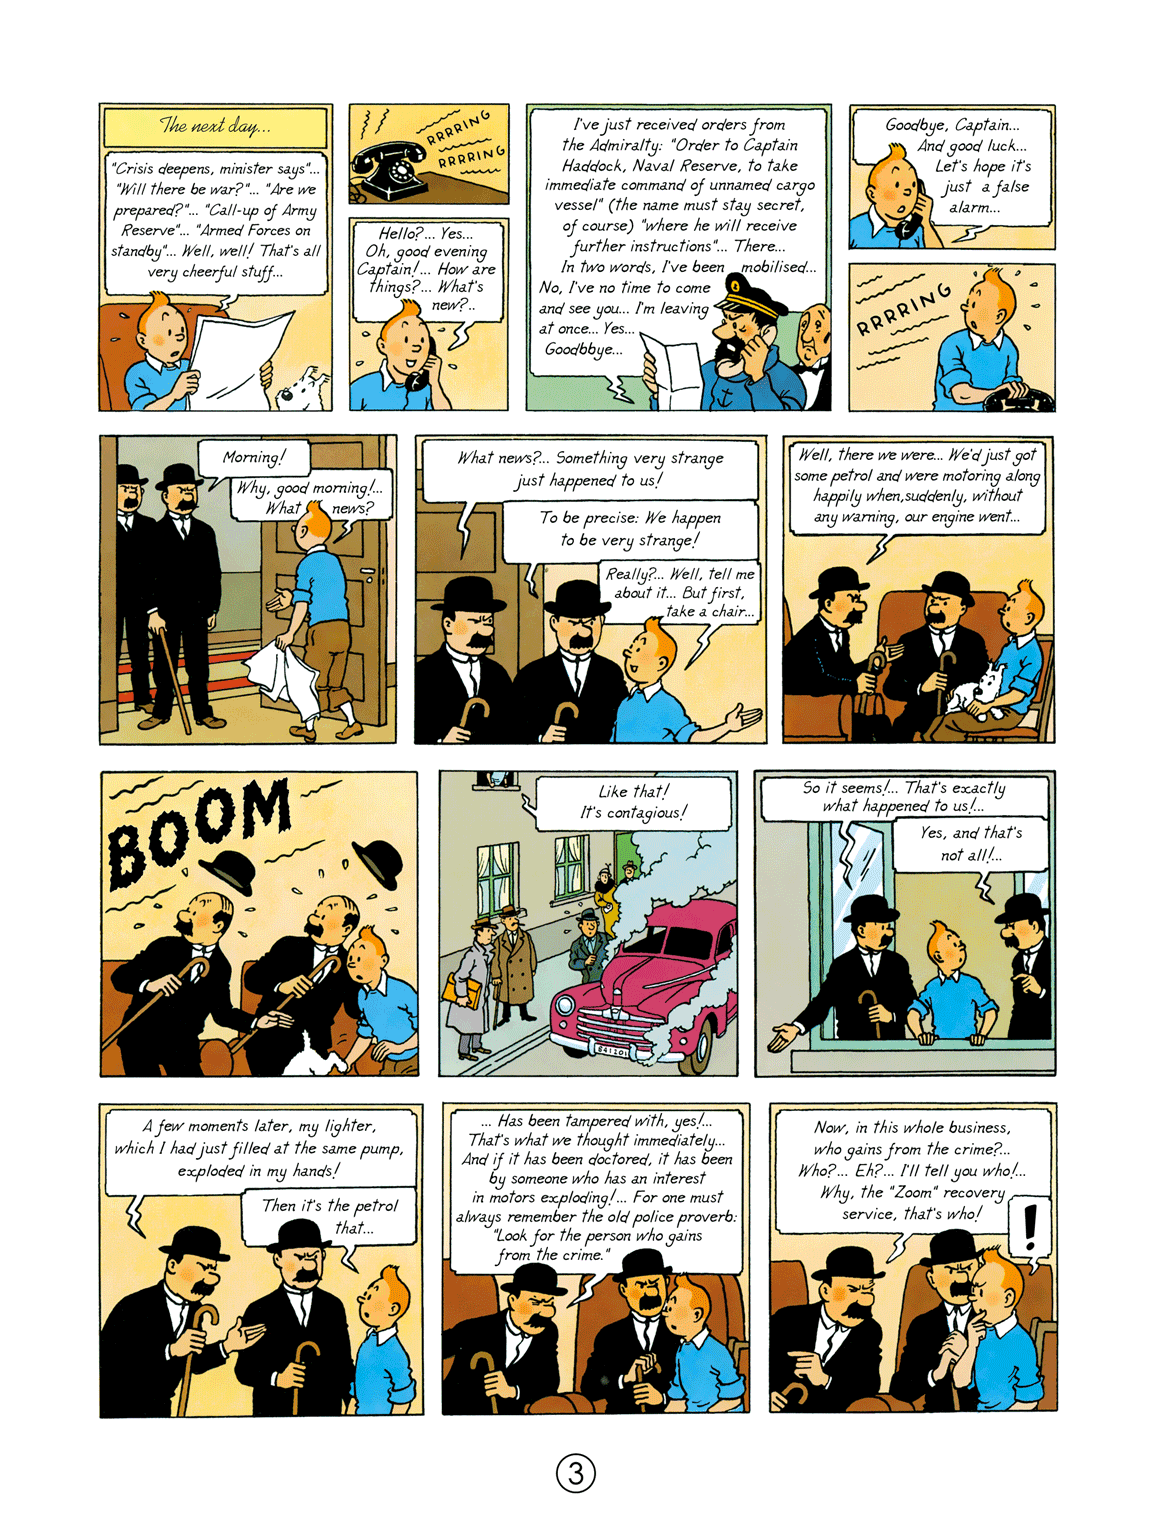 Land of Black Gold (The Adventures of Tintin) by Hergé